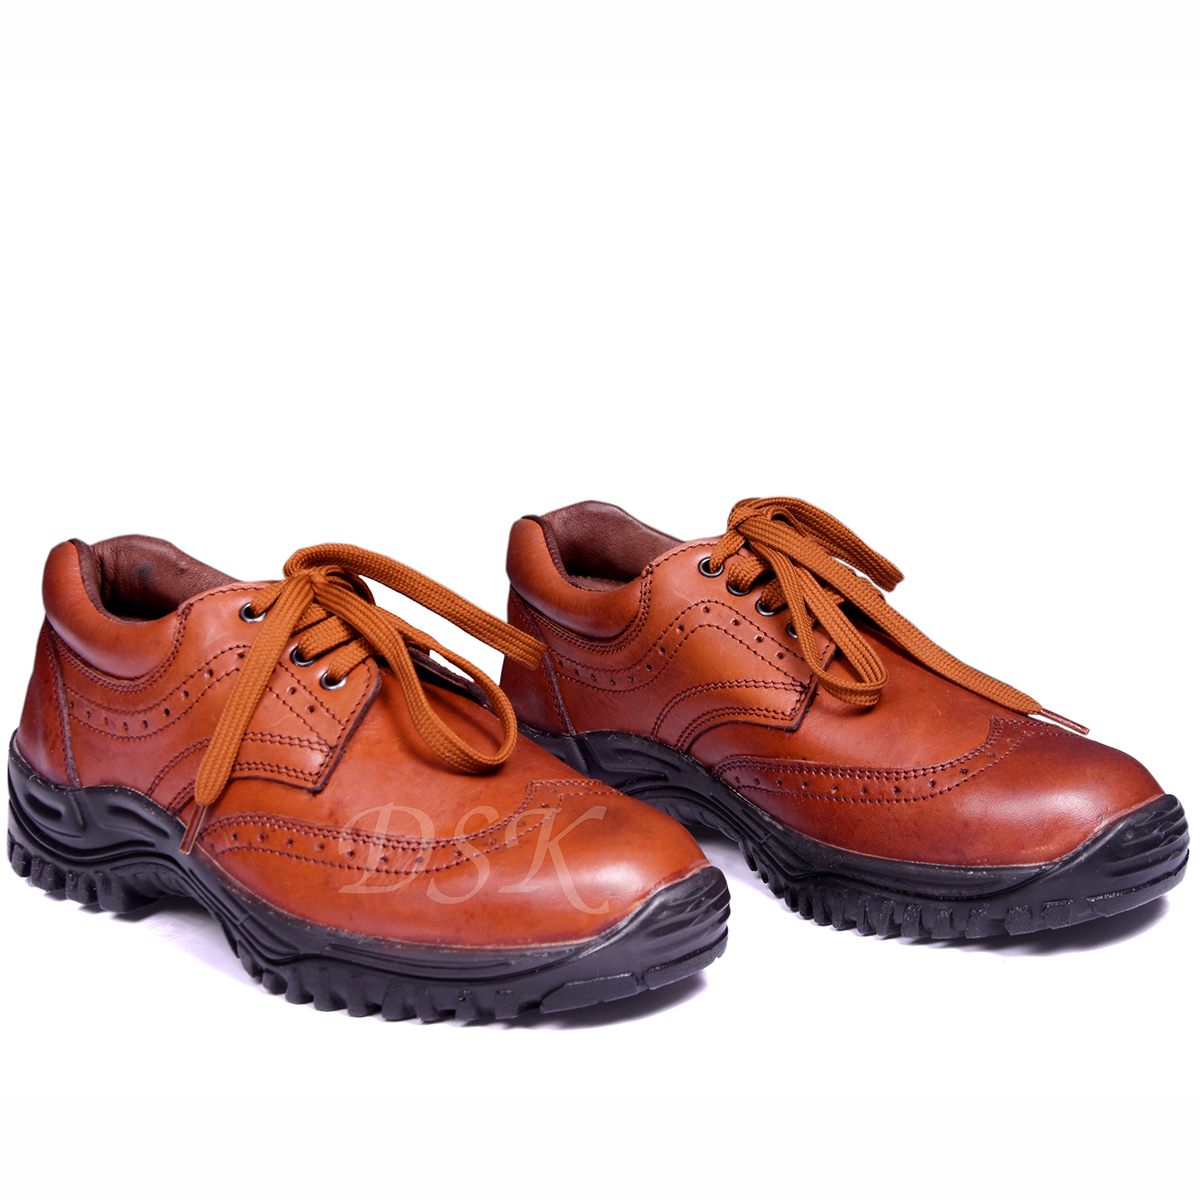 DSK Officer Safety Shoes Manufacturers, Suppliers in Pune